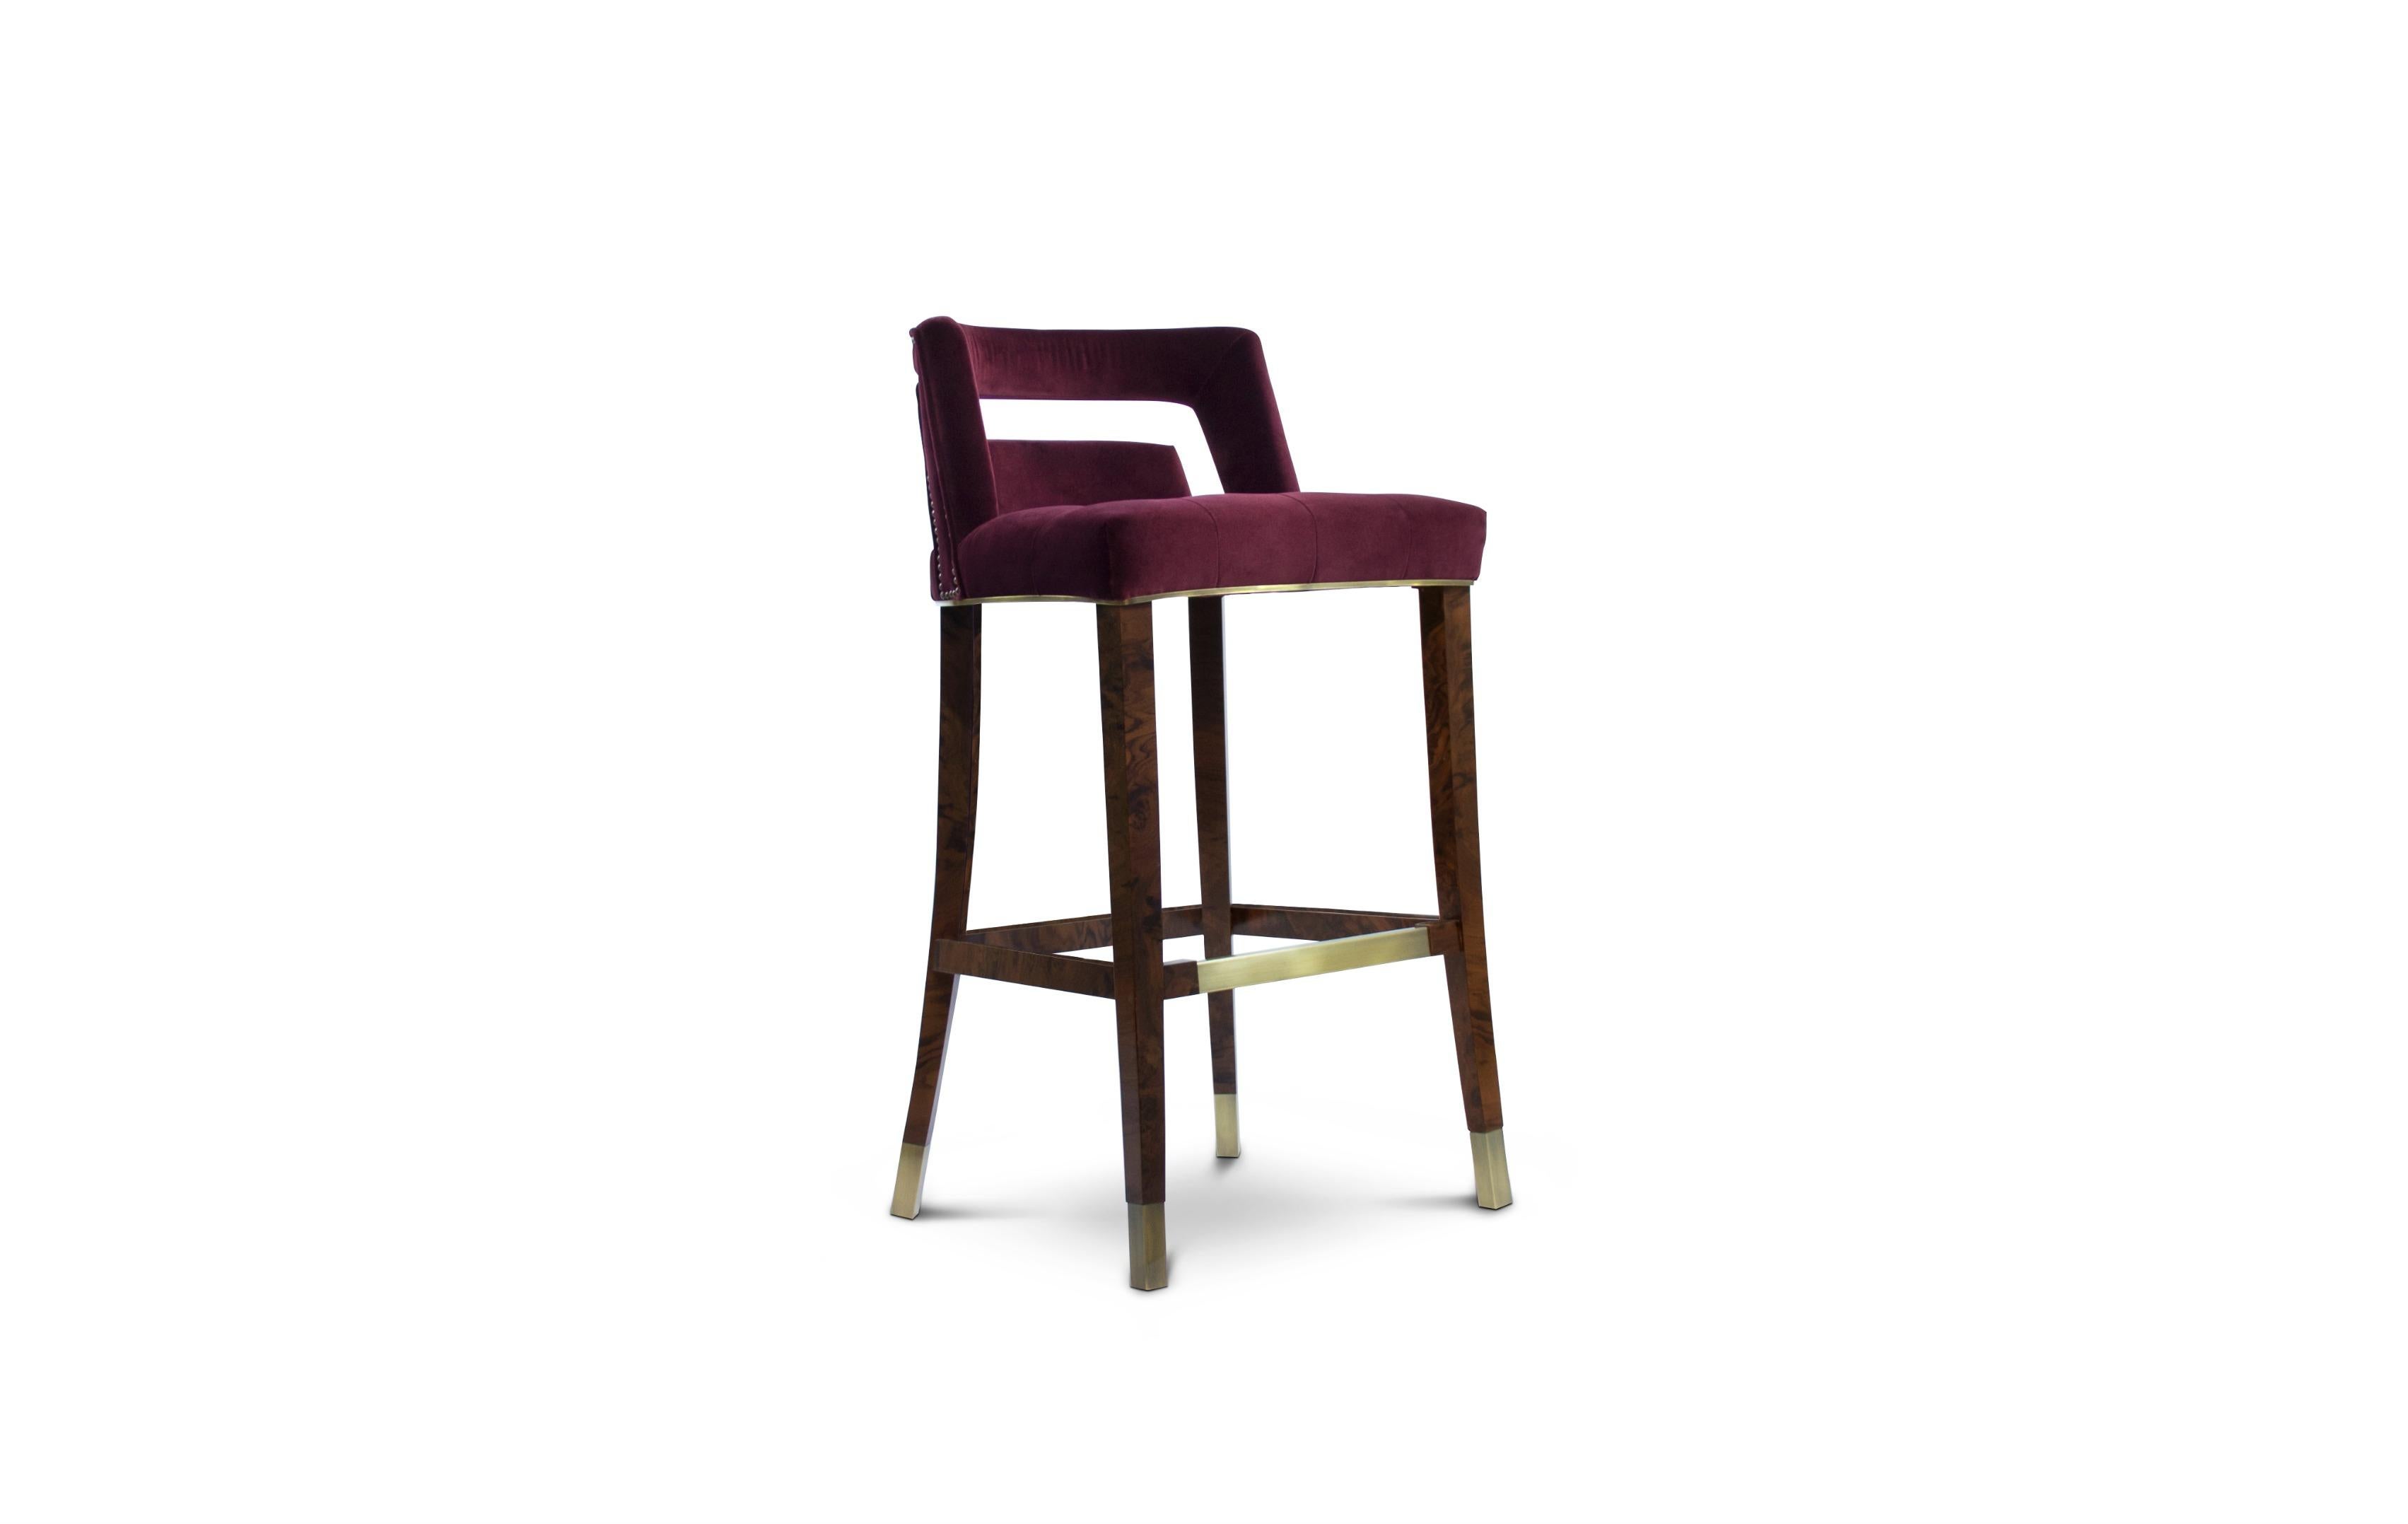 Guatemala was the stage of one of the most important discoveries in the 20th century – the Naj Tunich. Inspired by it is NAJ bar chair, a contemporary bar chair upholstered in cotton velvet with nickeled nails and legs in ash with walnut stain matte